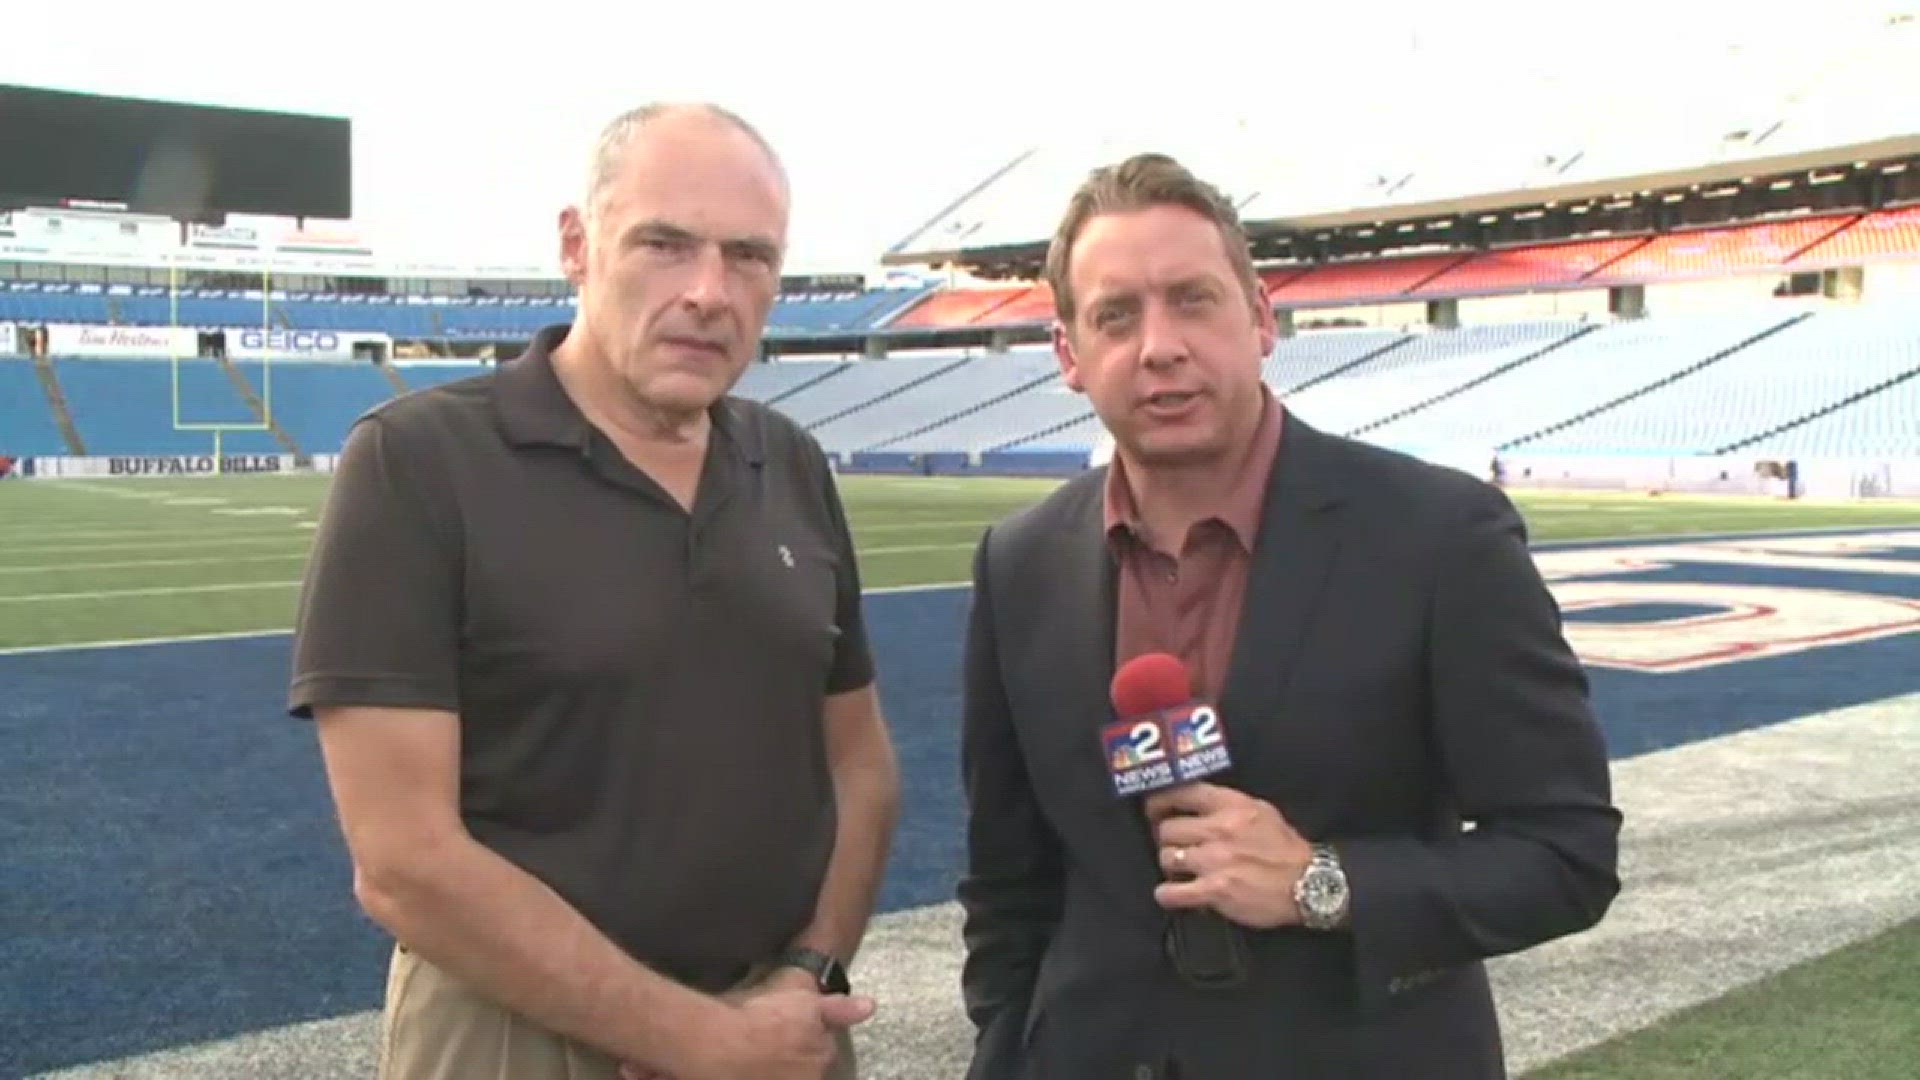 Adam Benigni and Vic Carucci discuss the Bills loss to the Chargers.